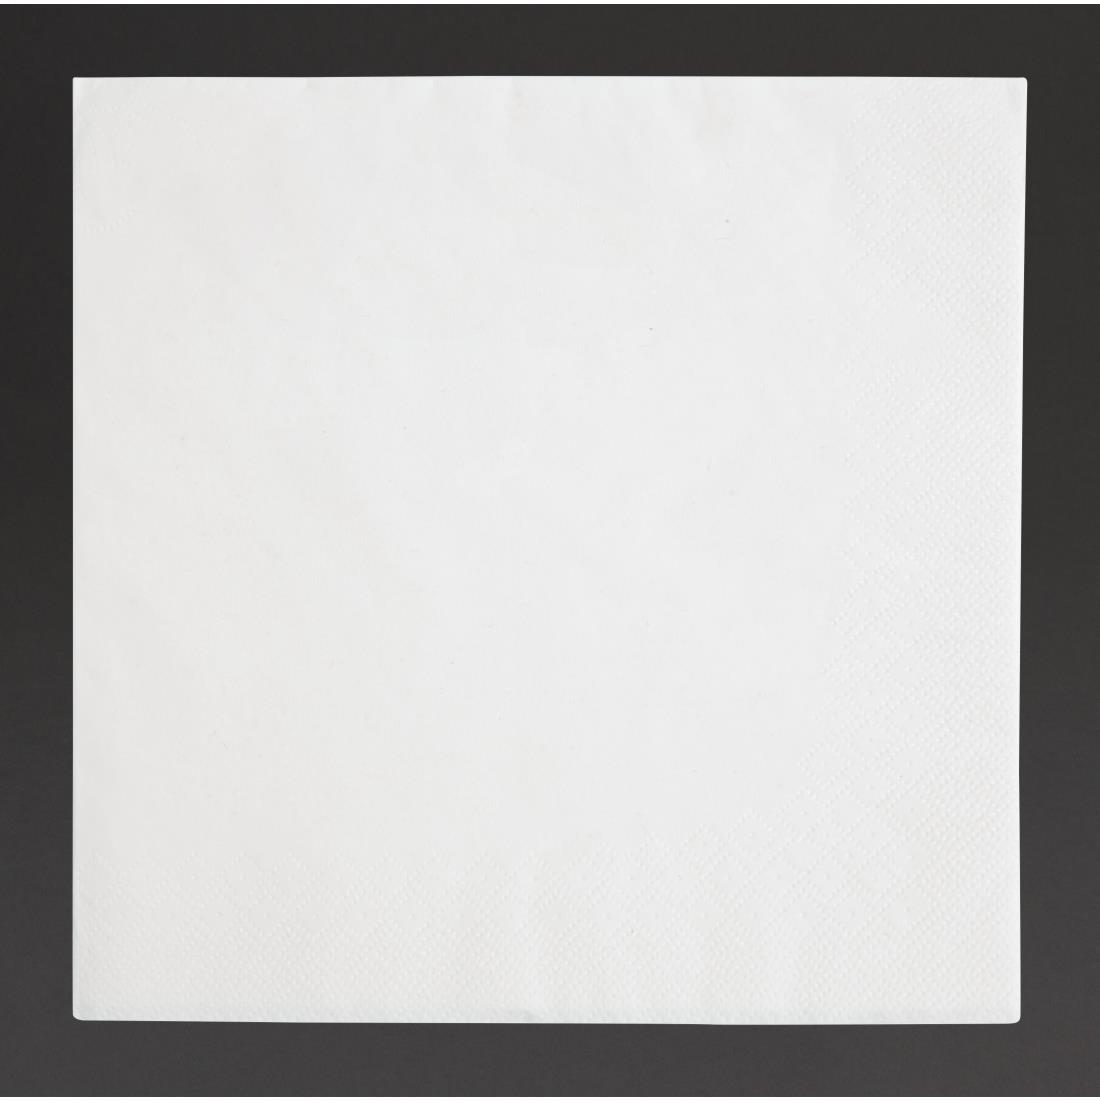 Fiesta Recyclable Dinner Napkin White 40x40cm 3ply 1/4 Fold (Pack of 1000) - FE251  - 1